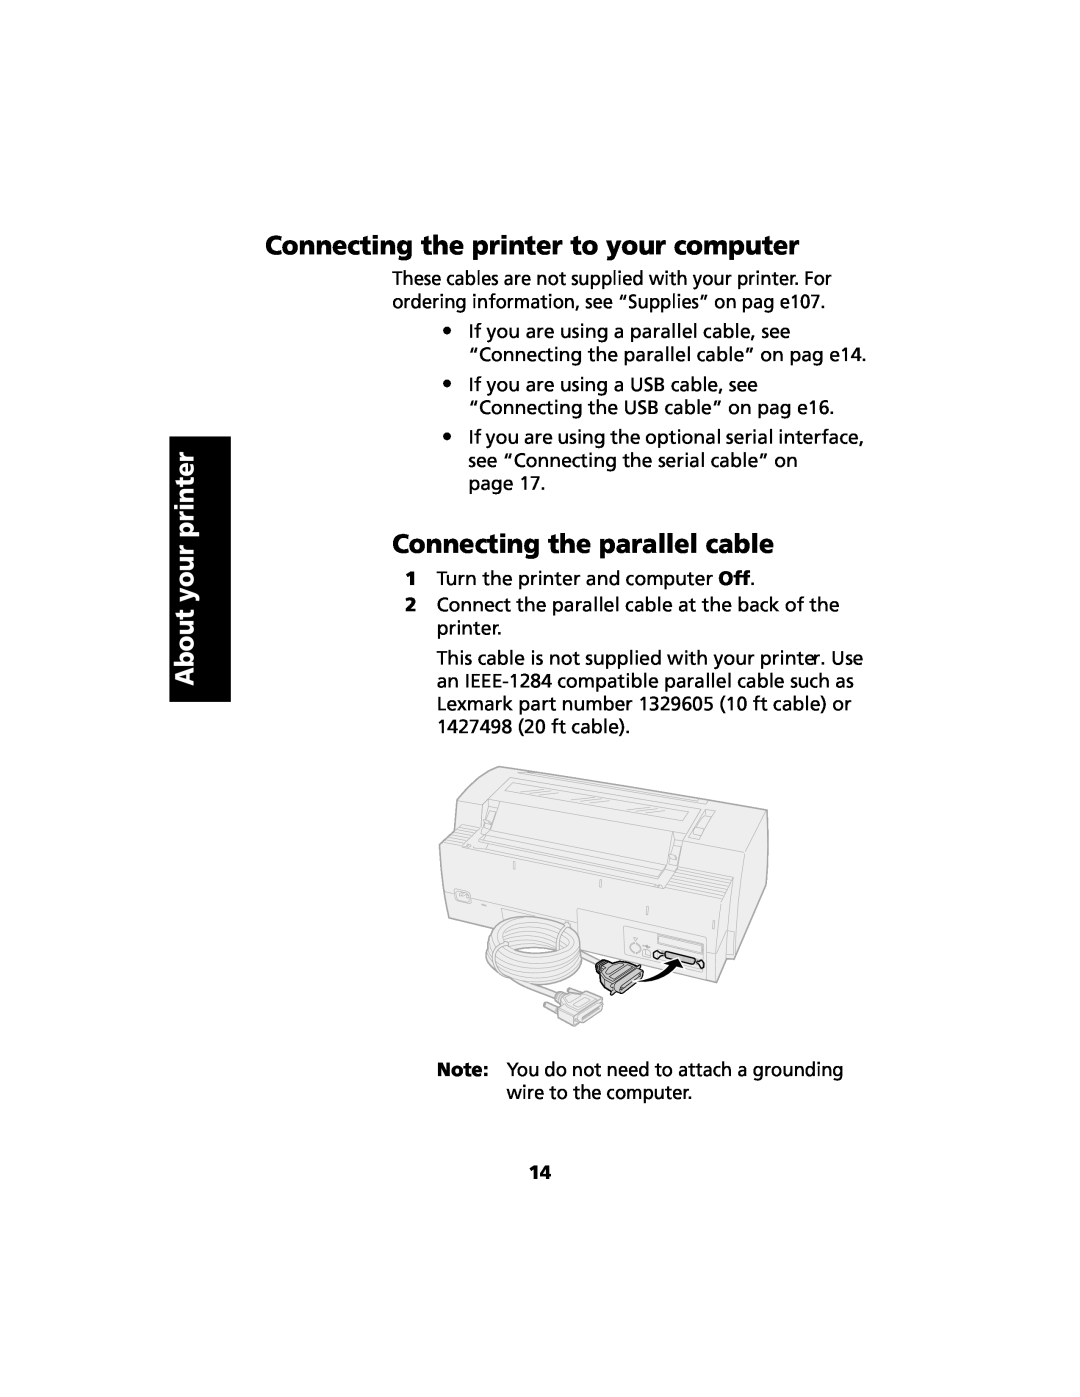 Lexmark 2480 manual Connecting the printer to your computer, Connecting the parallel cable, About your printer 